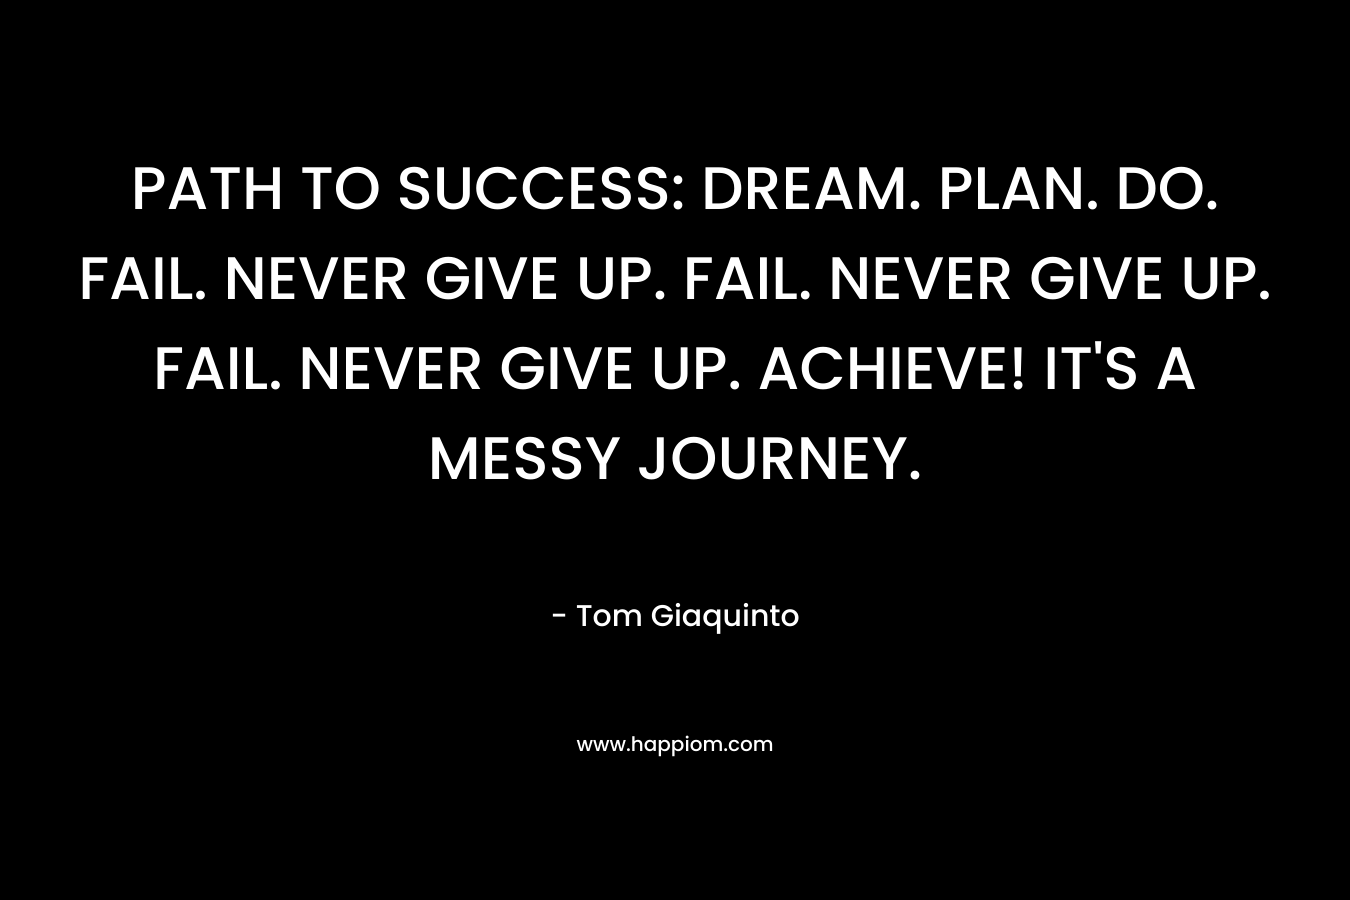 PATH TO SUCCESS: DREAM. PLAN. DO. FAIL. NEVER GIVE UP. FAIL. NEVER GIVE UP. FAIL. NEVER GIVE UP. ACHIEVE! IT’S A MESSY JOURNEY. – Tom Giaquinto